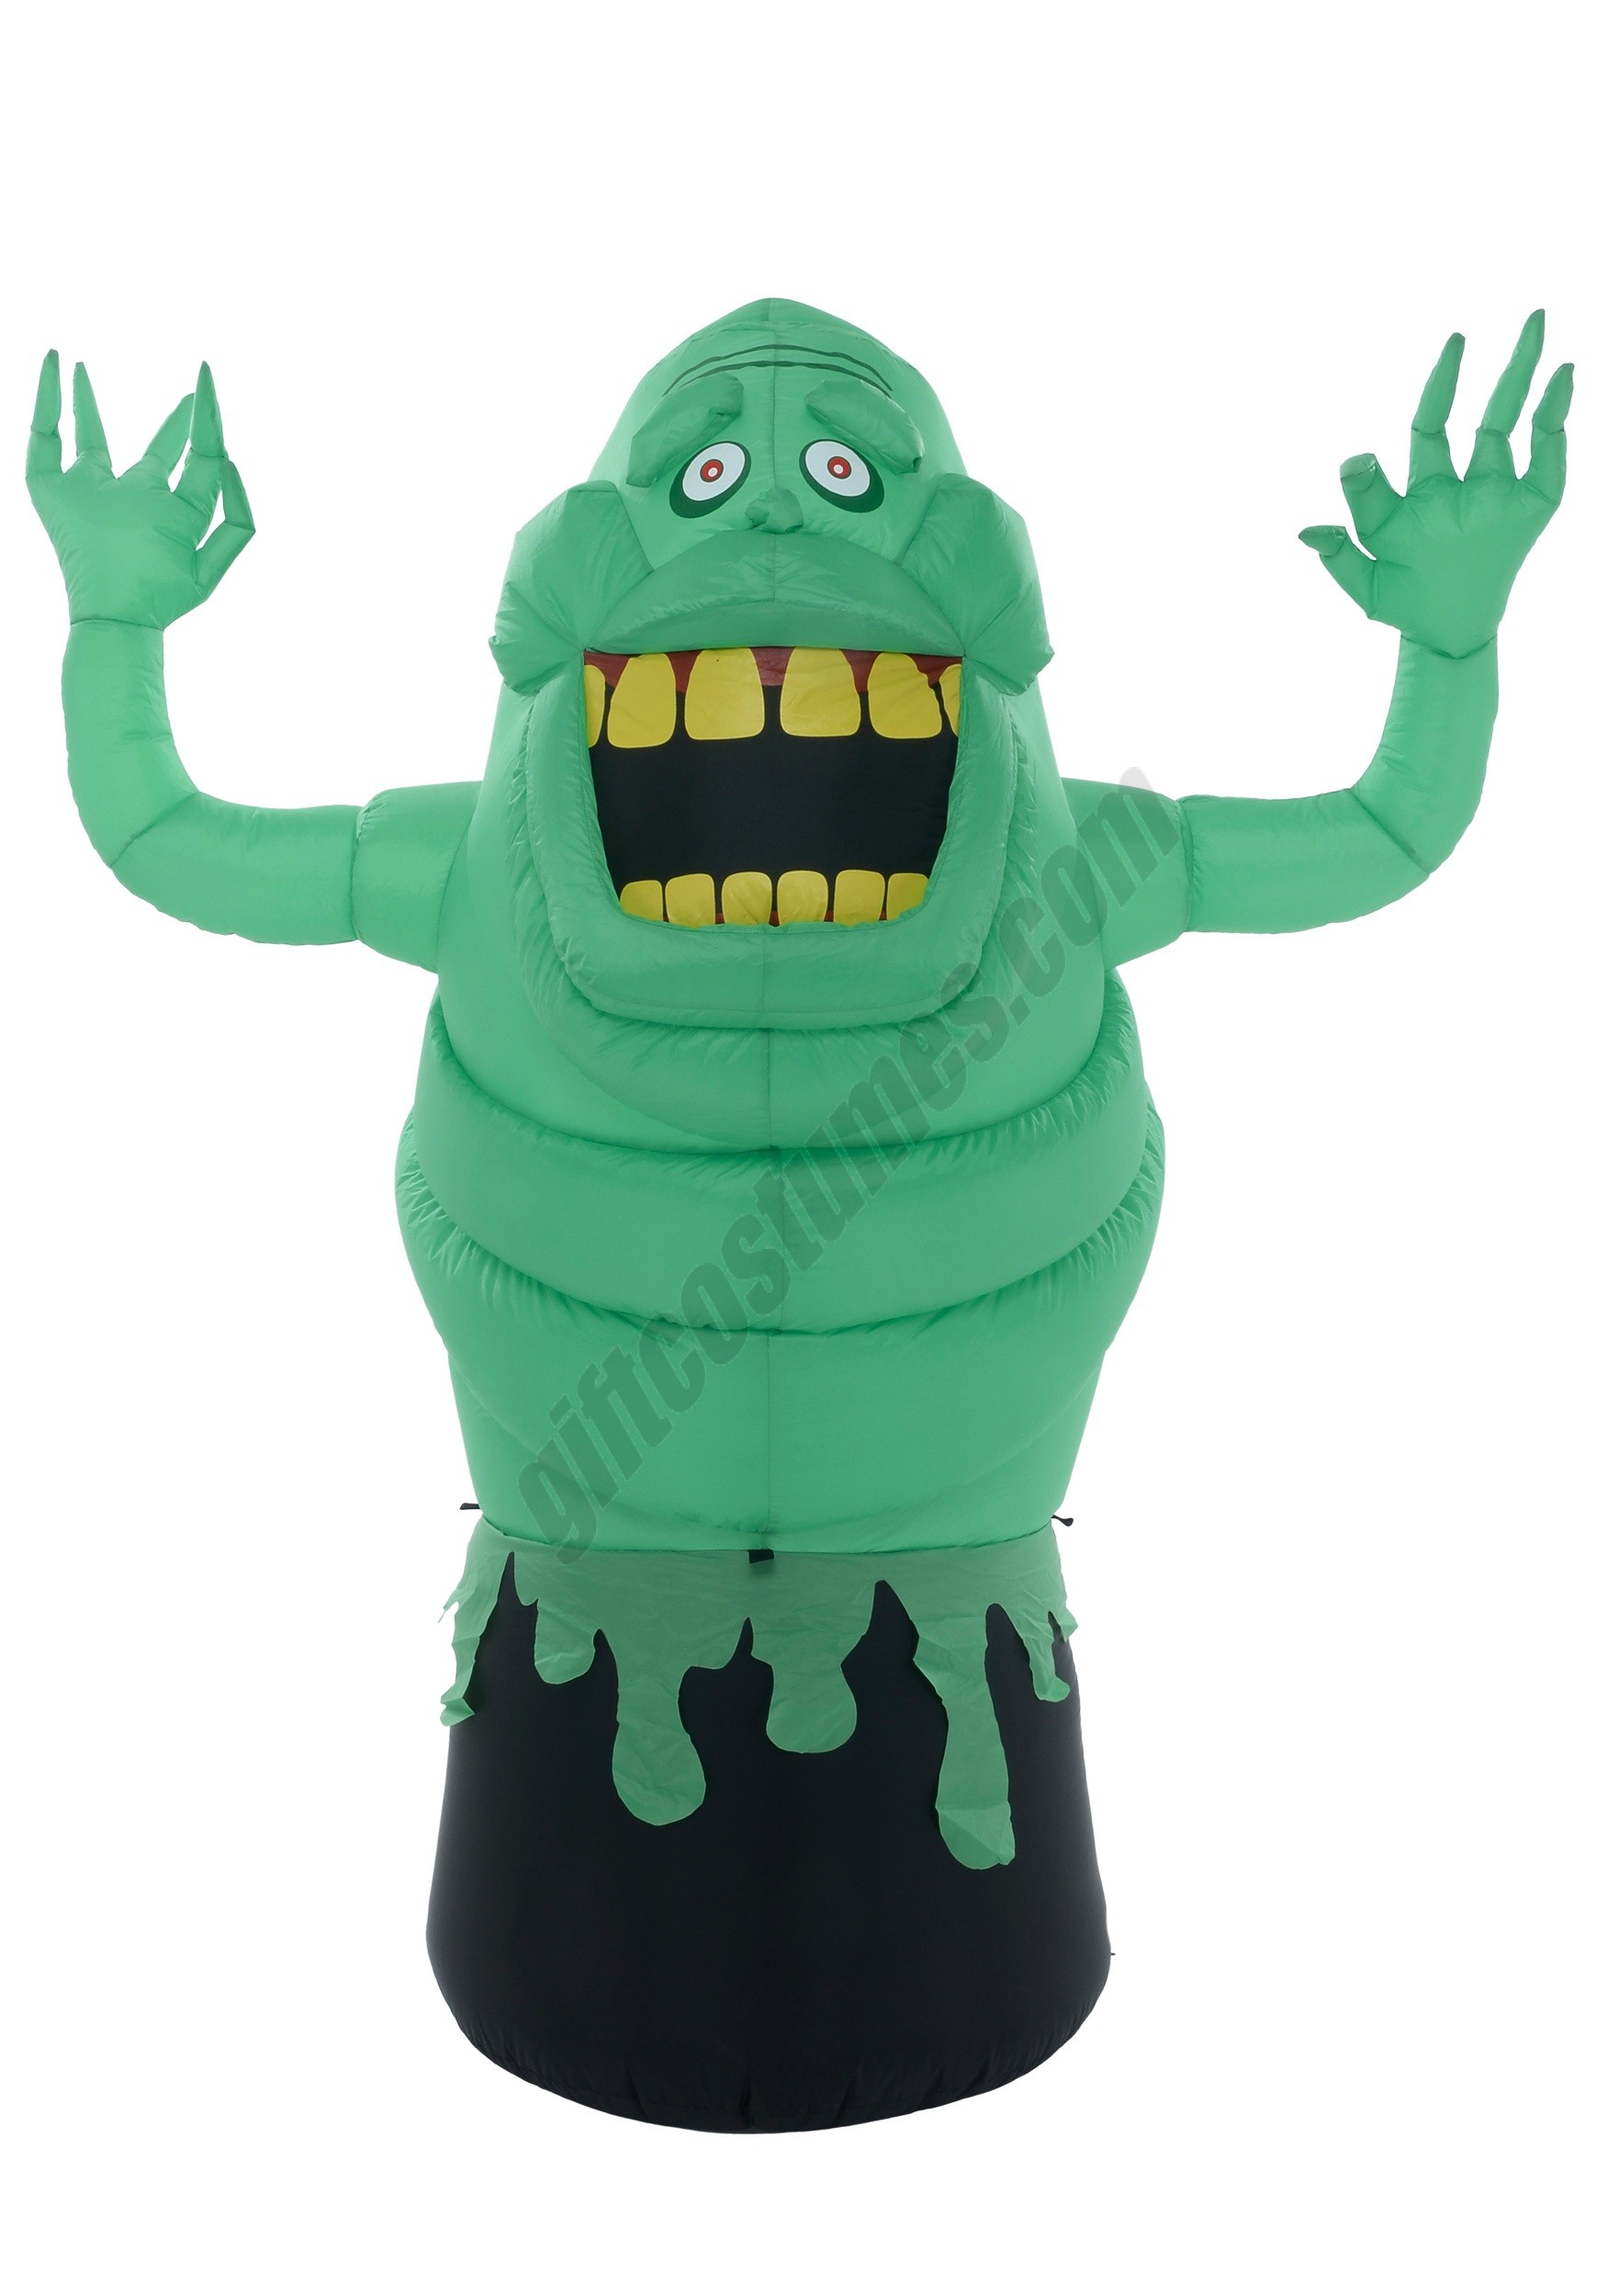 Ghostbusters Slimer Inflatable Promotions - Ghostbusters Slimer Inflatable Promotions